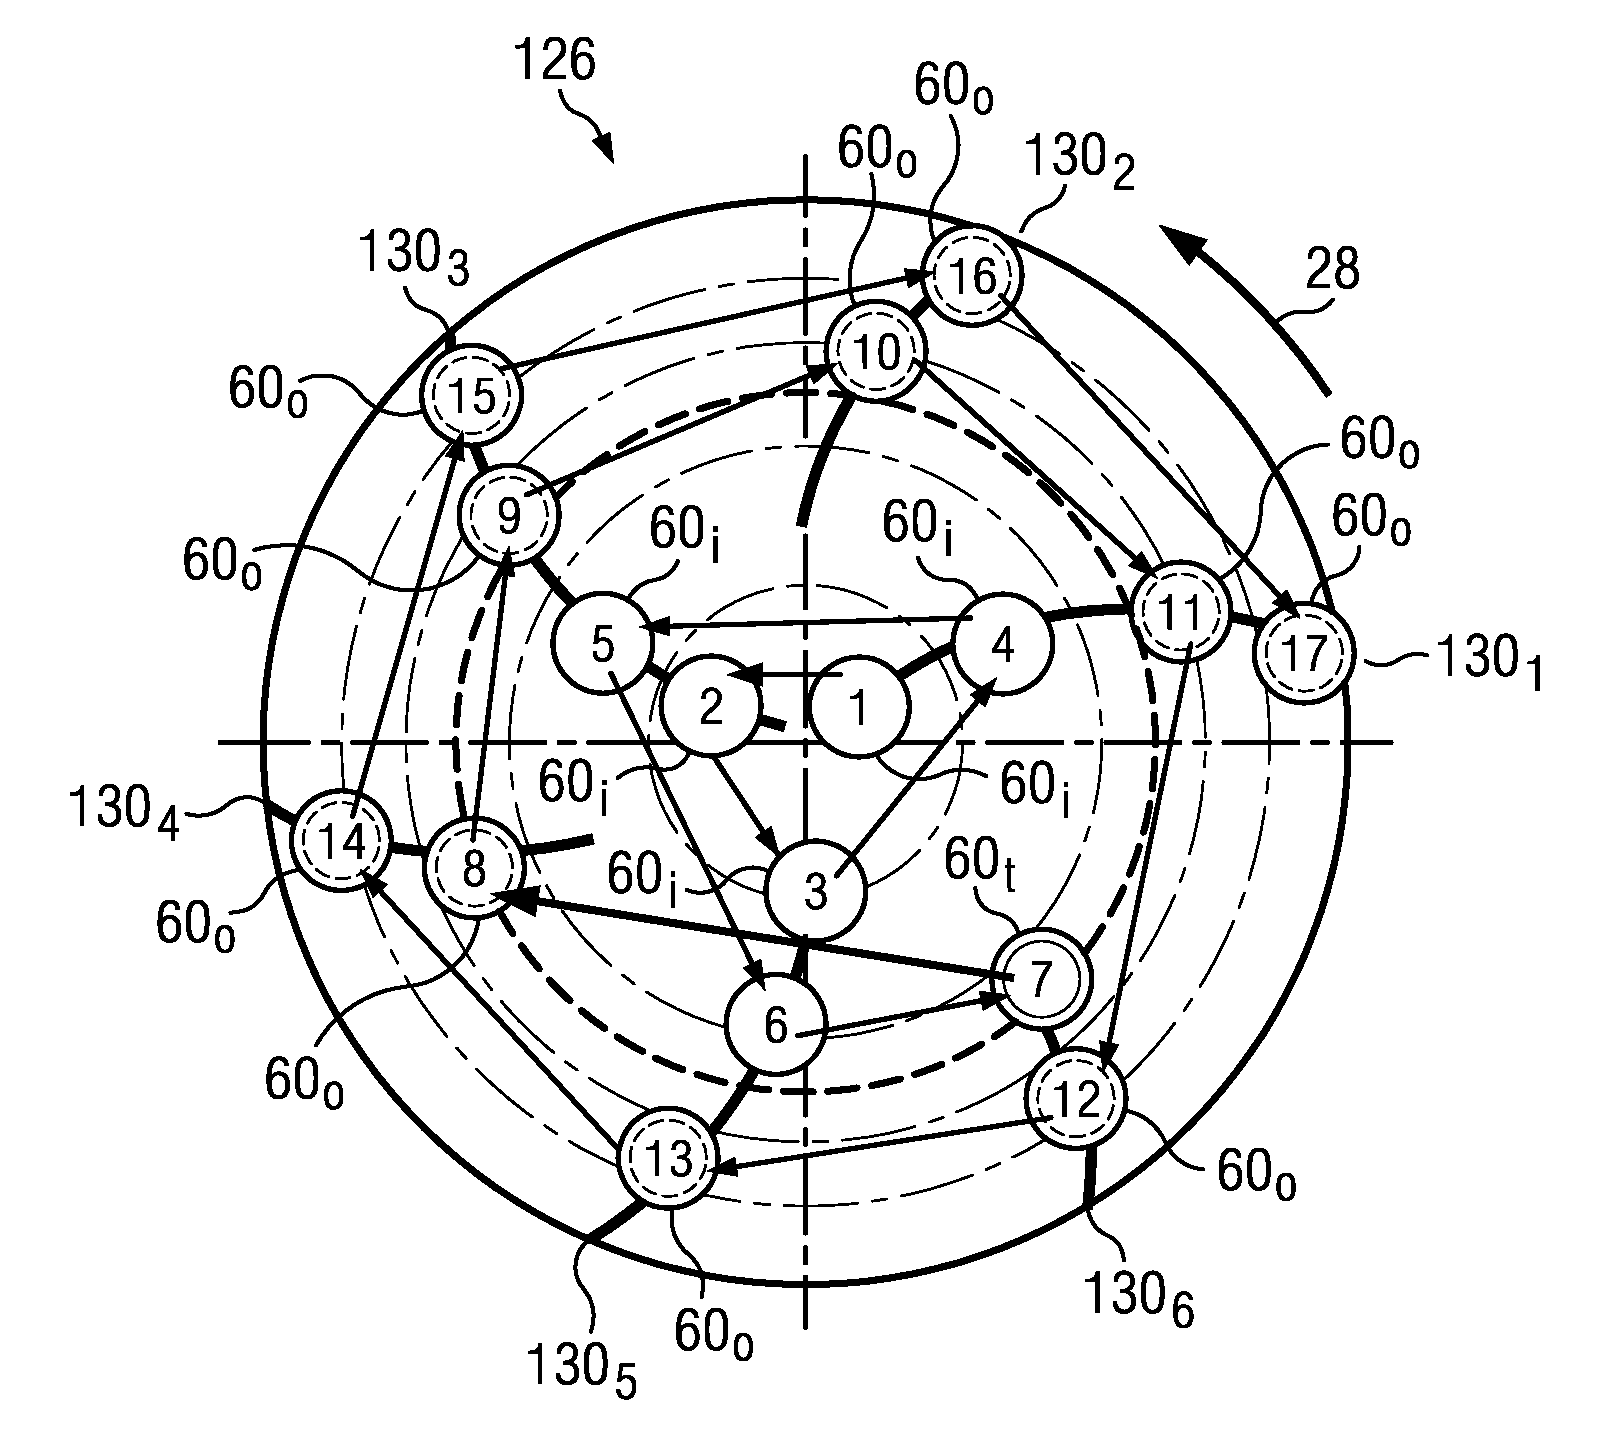 PDC bits with cutters laid out in both spiral directions of bit rotation